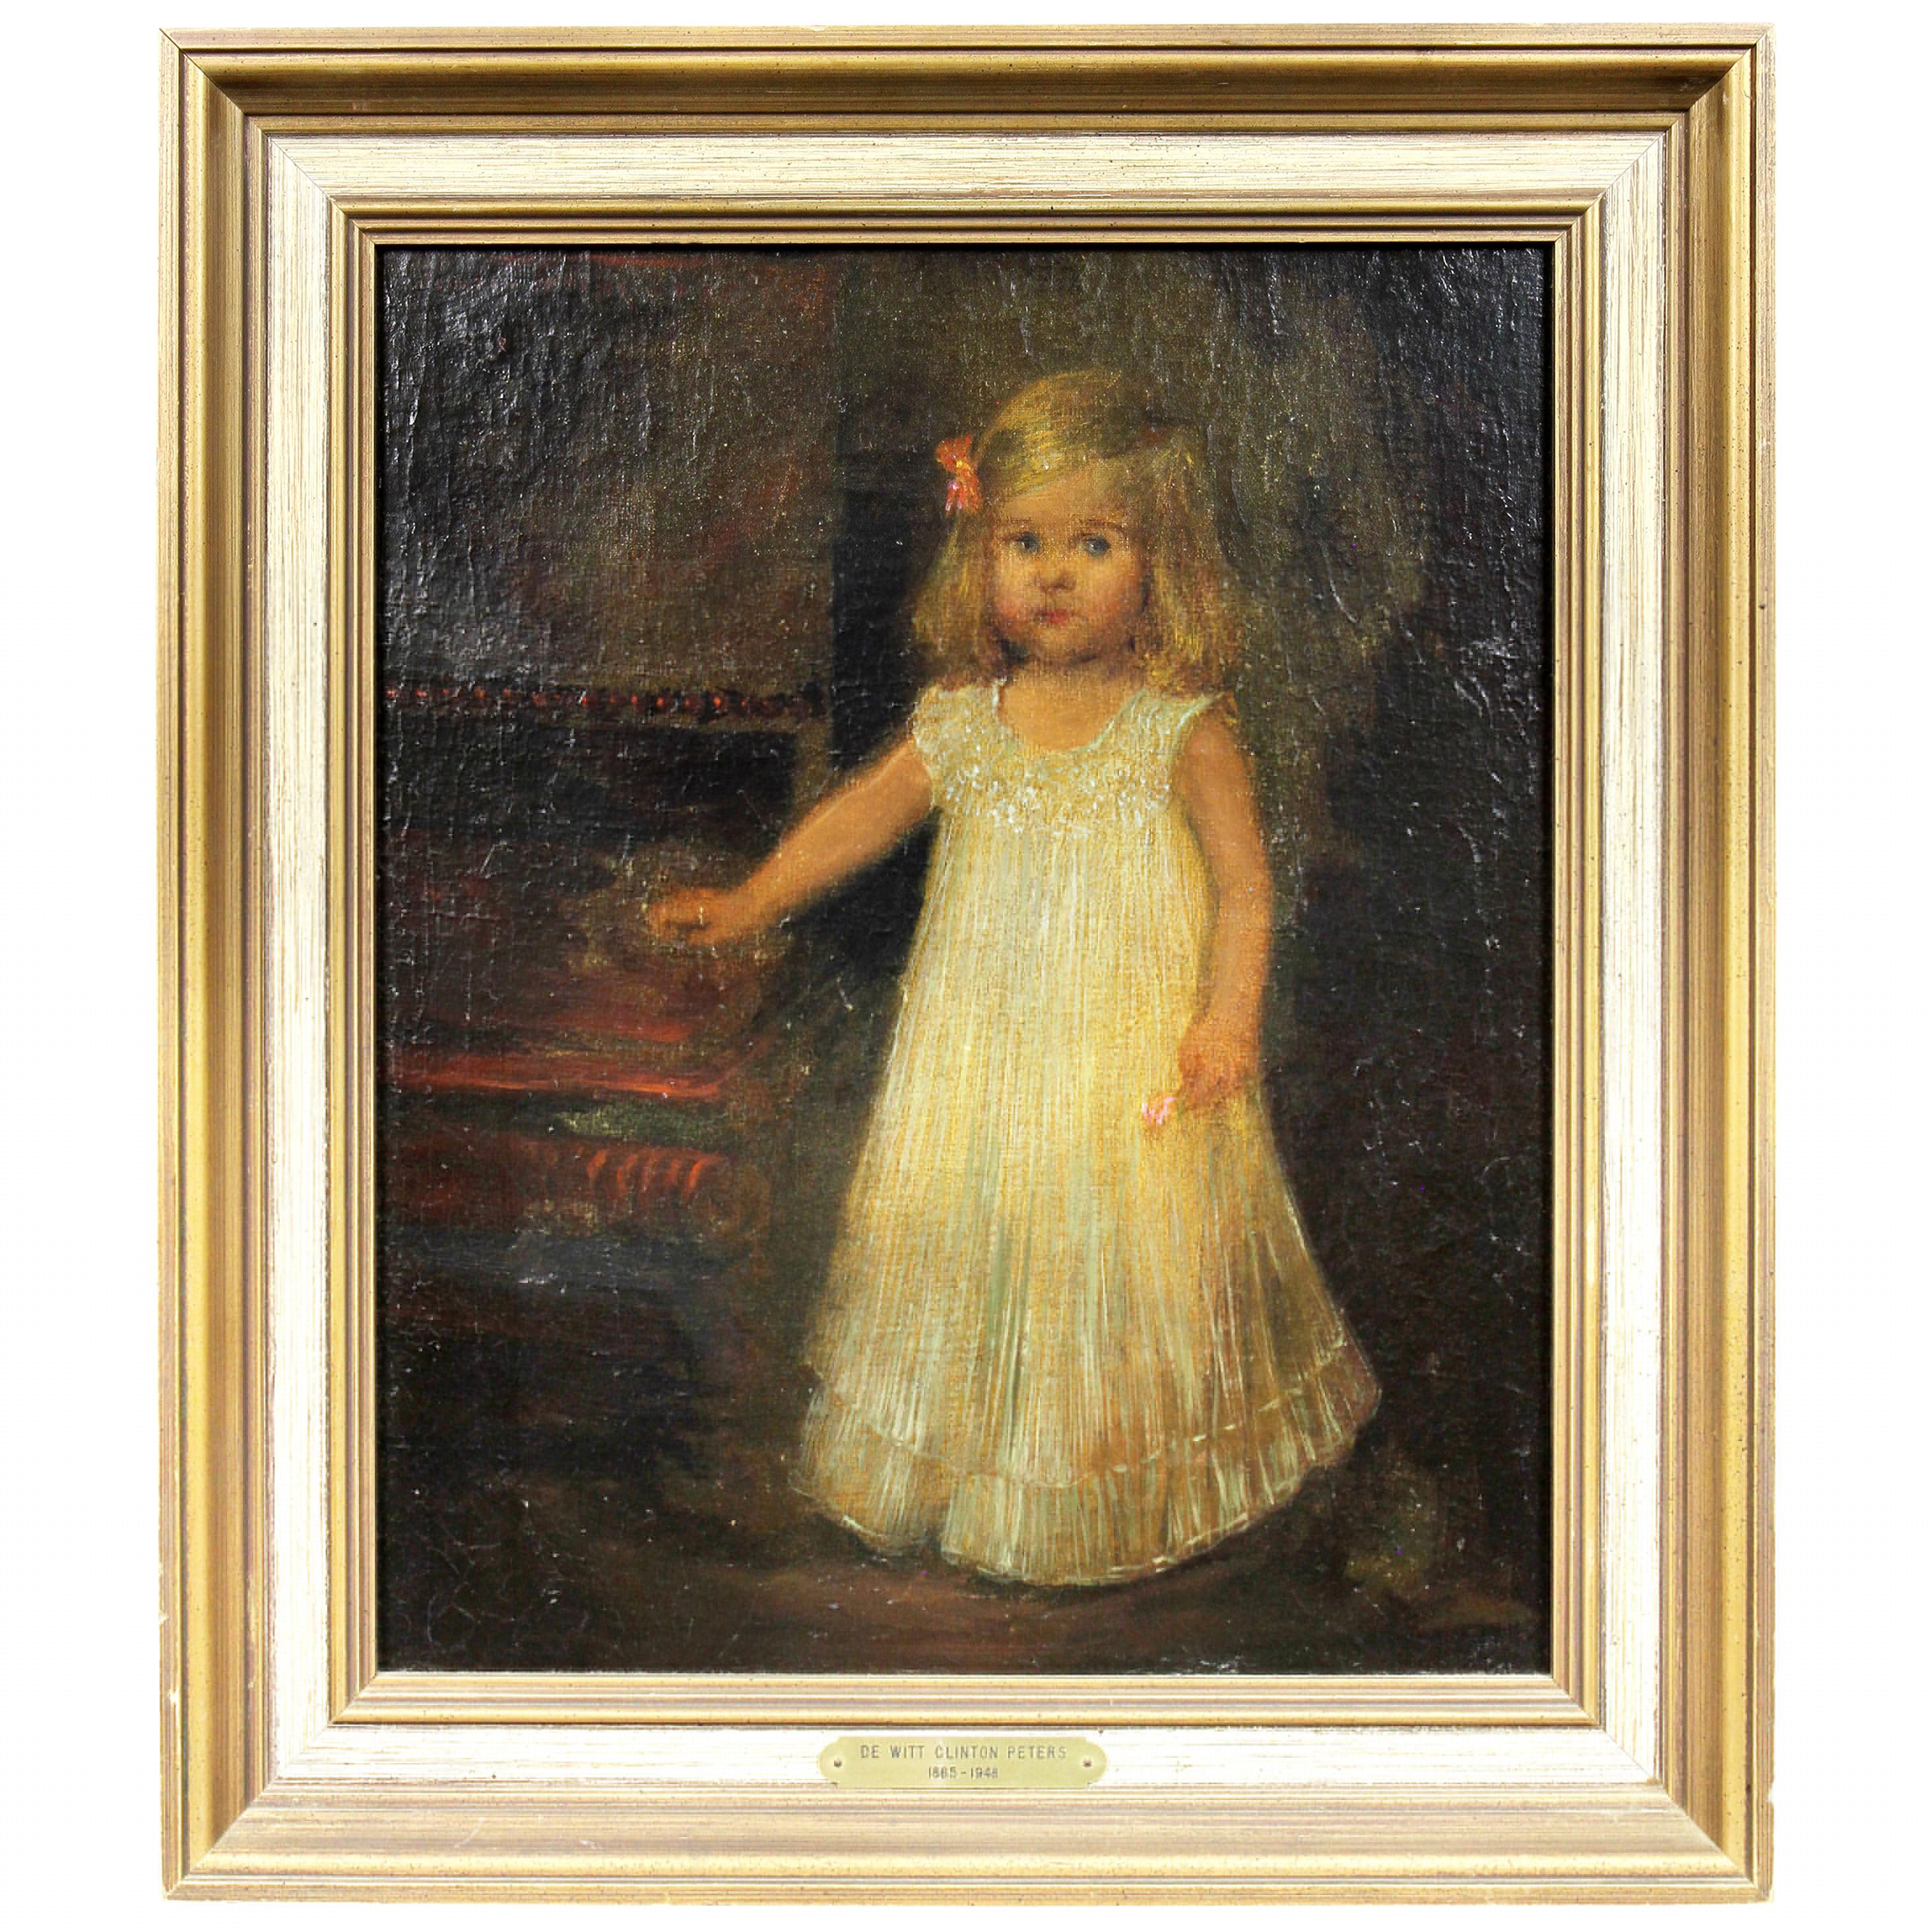 Oil on Canvas of a Young Girl